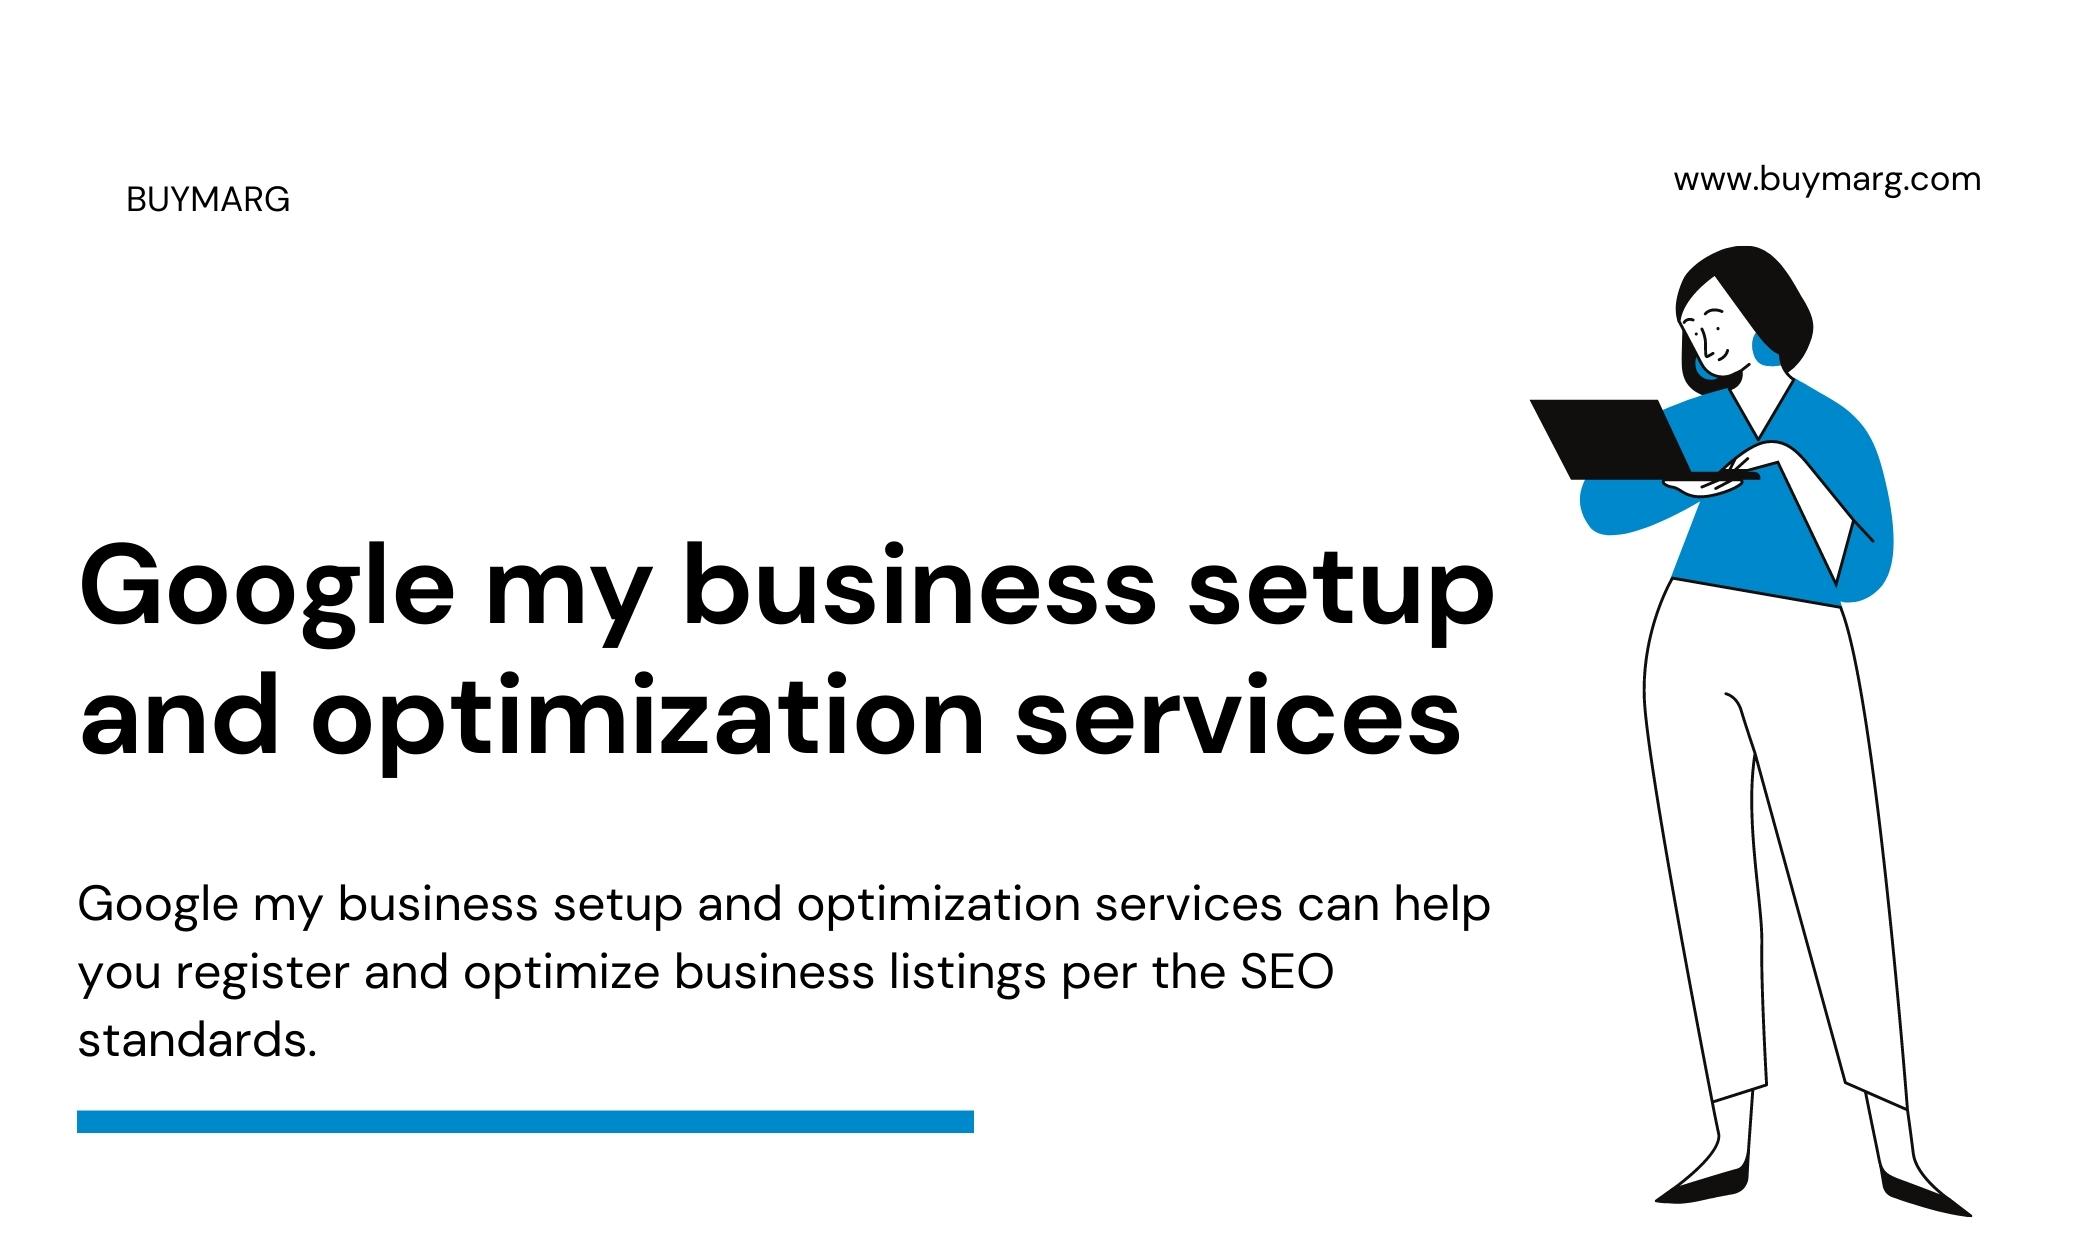 Google my business setup and optimization services